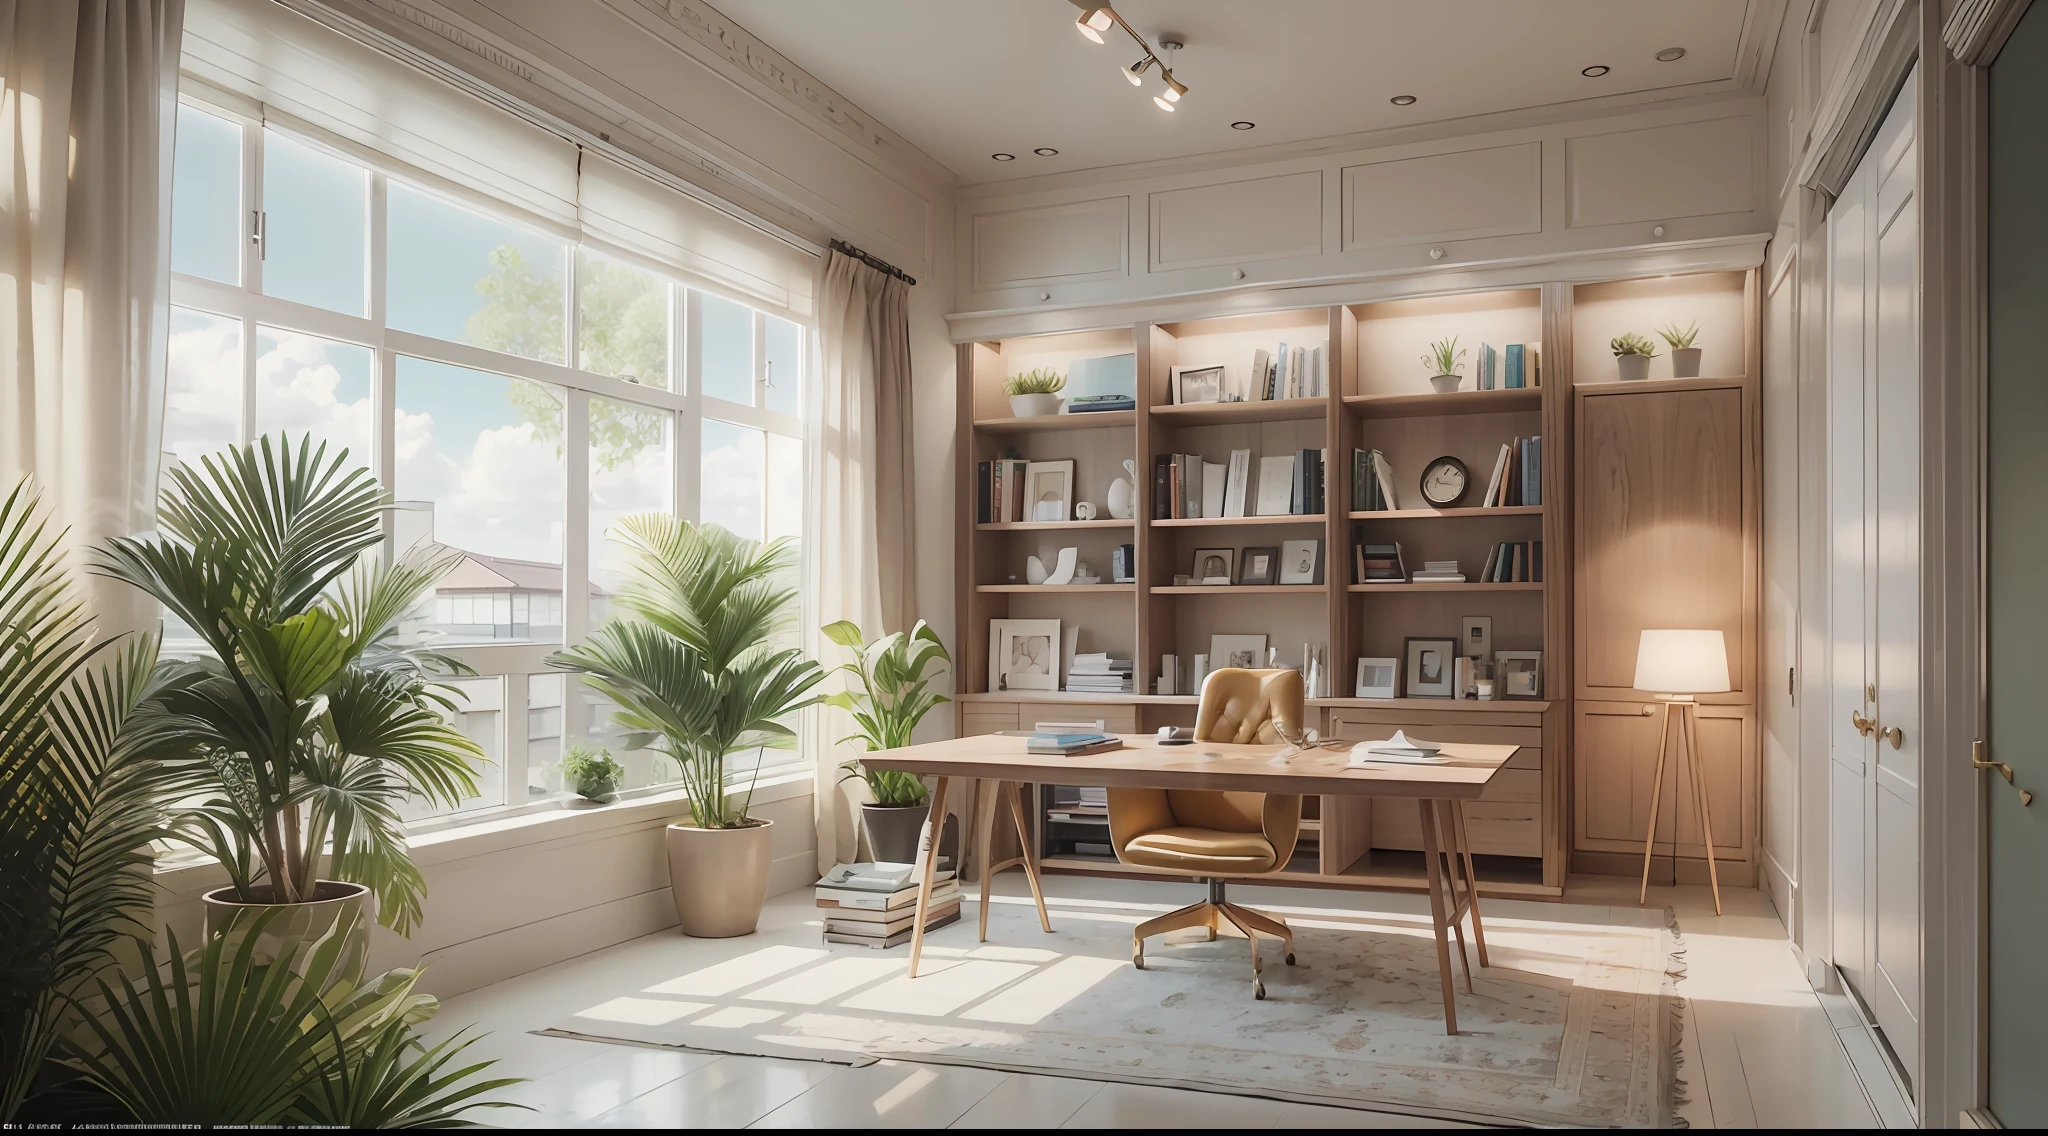 Minimalist style，study room，Rare flowers and plants（1:0.005），suns rays，Large simple desk，bookshelves，sofe，Clean walls，Clean ceilings，No main light desigward winning masterpiece，The details are incredible，big window，highly  detailed，Harper's Bazaar art，fashion magazine，fluency，Clear focus，8K，rendering by octane